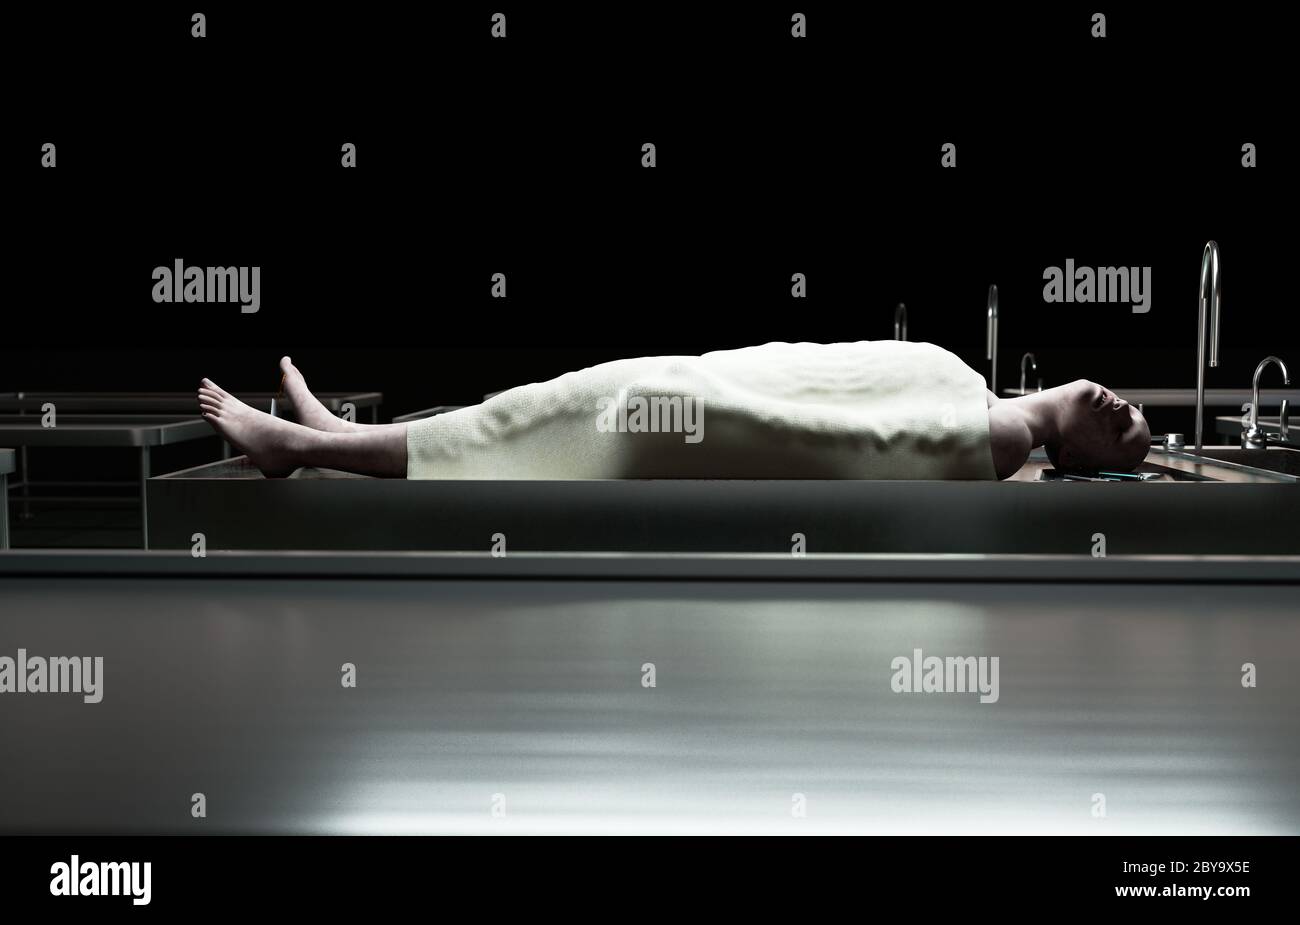 cadaver, dead male body in morgue on steel table. Corpse. Autopsy concept. 3d rendering. Stock Photo